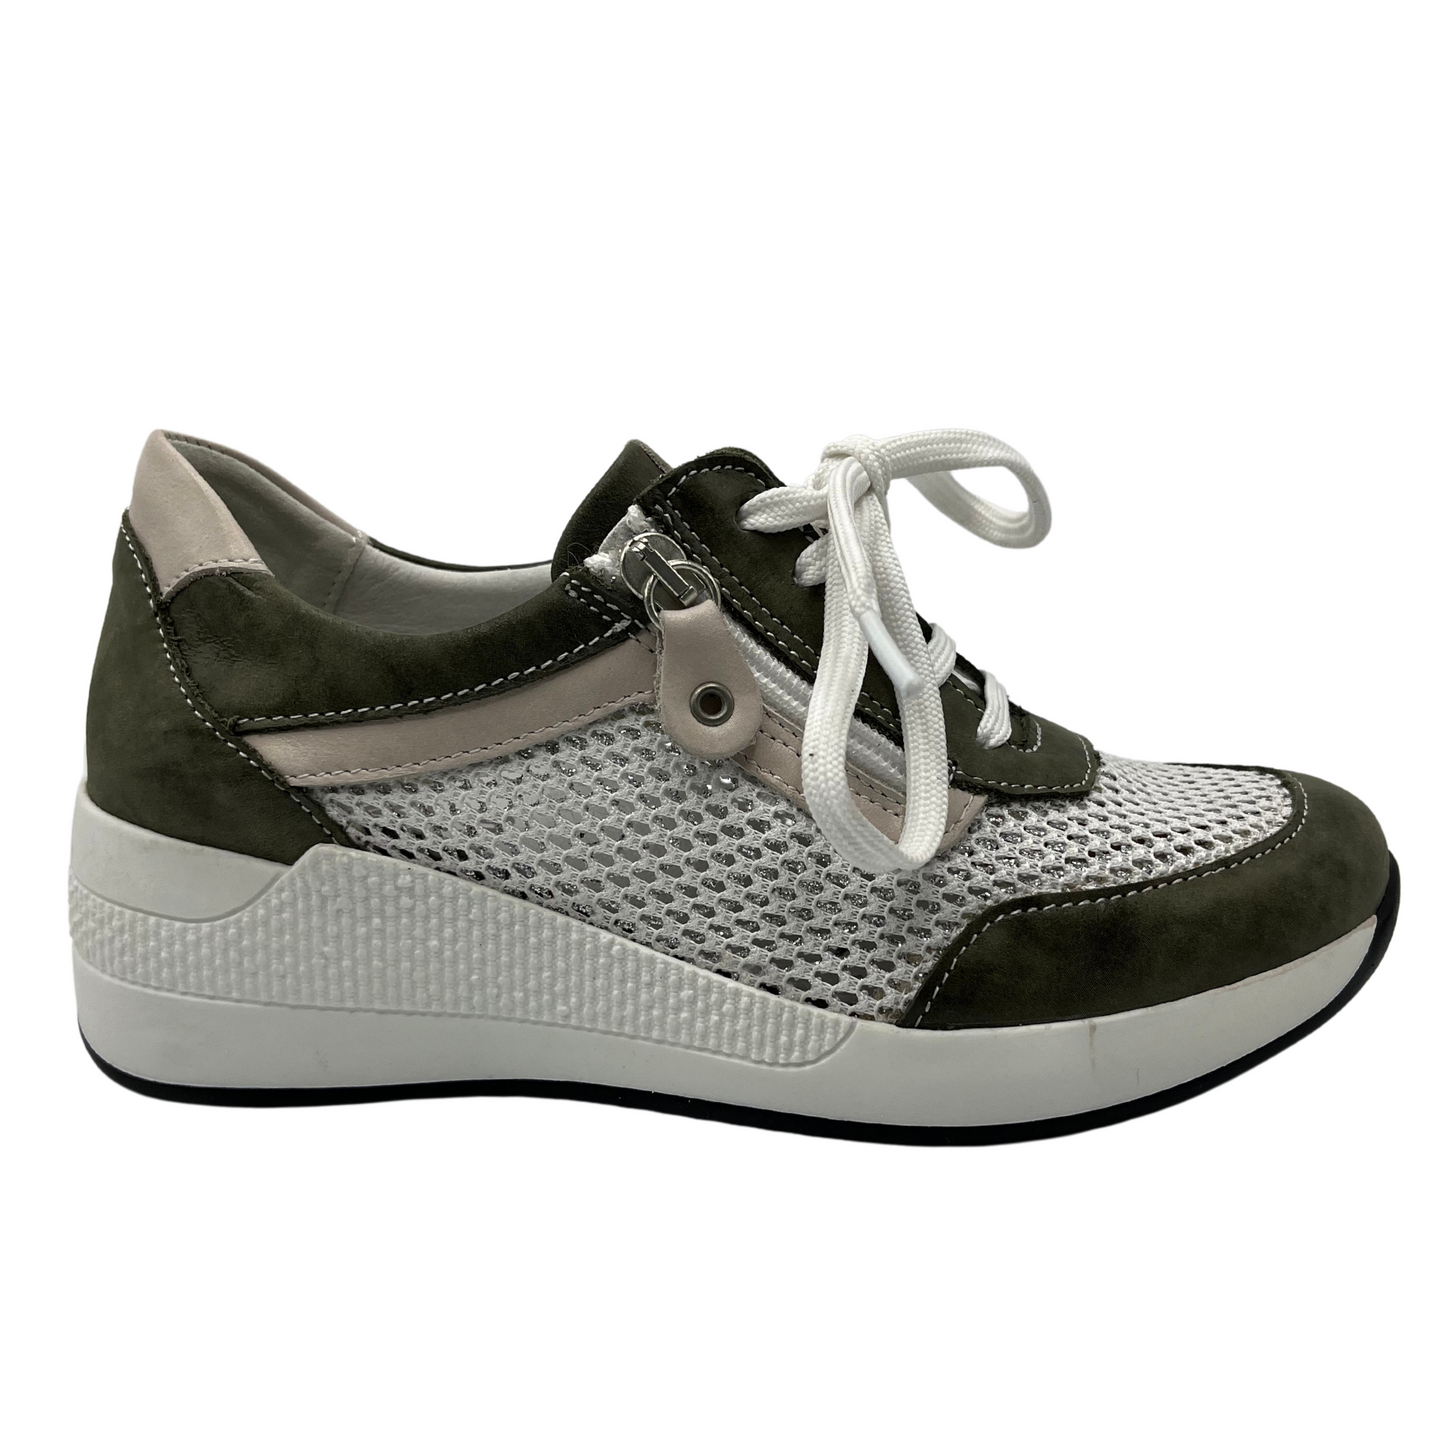 Right facing view of women's wedge sneaker with white laces, mesh sides and side zipper